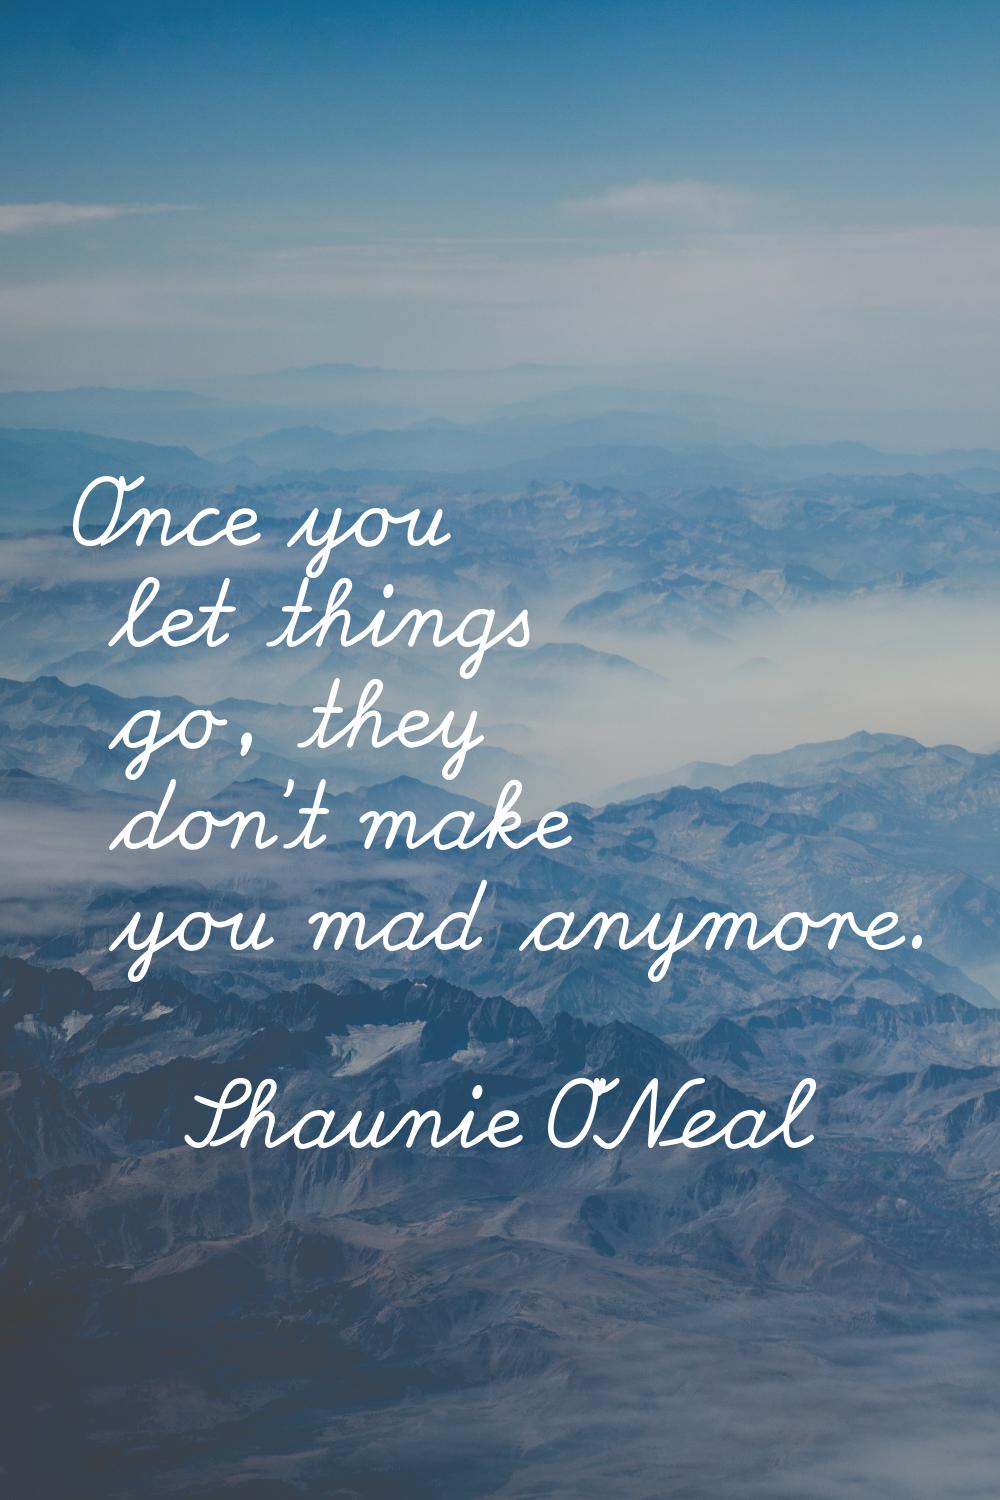 Once you let things go, they don't make you mad anymore.